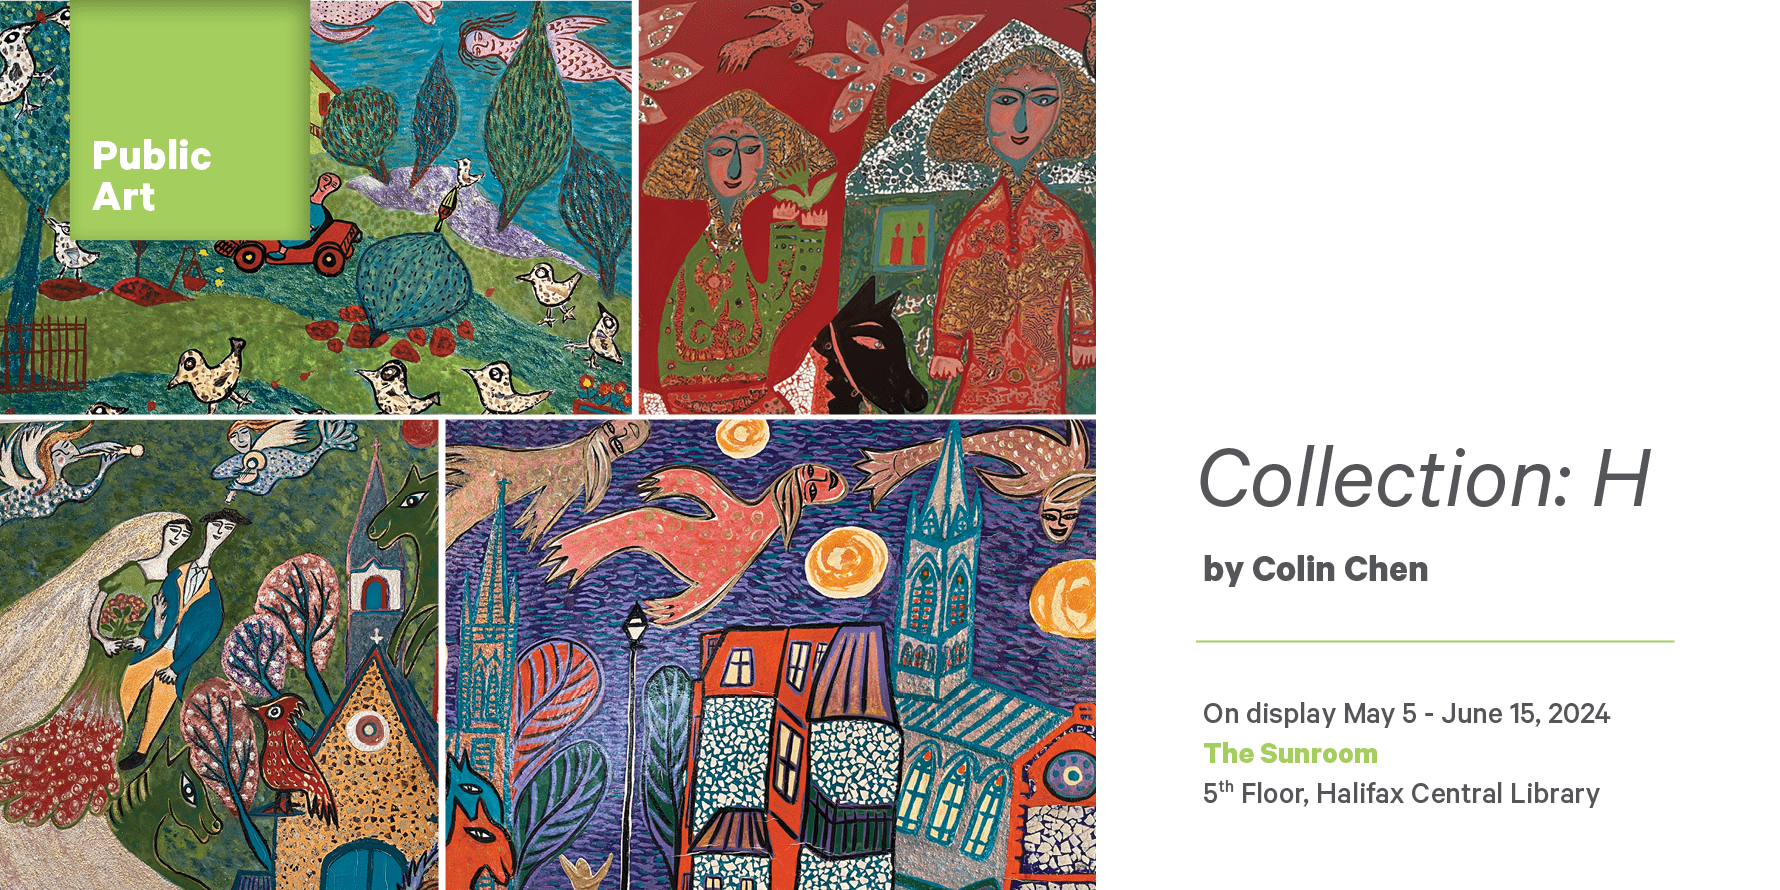 Collection: H by Colin Chen. On display May 5 - June 15, 2024. The Sunroom, 5th Floor, Halifax Central Library. Image: A 4x4 collage of contemporary Chinese folk art.